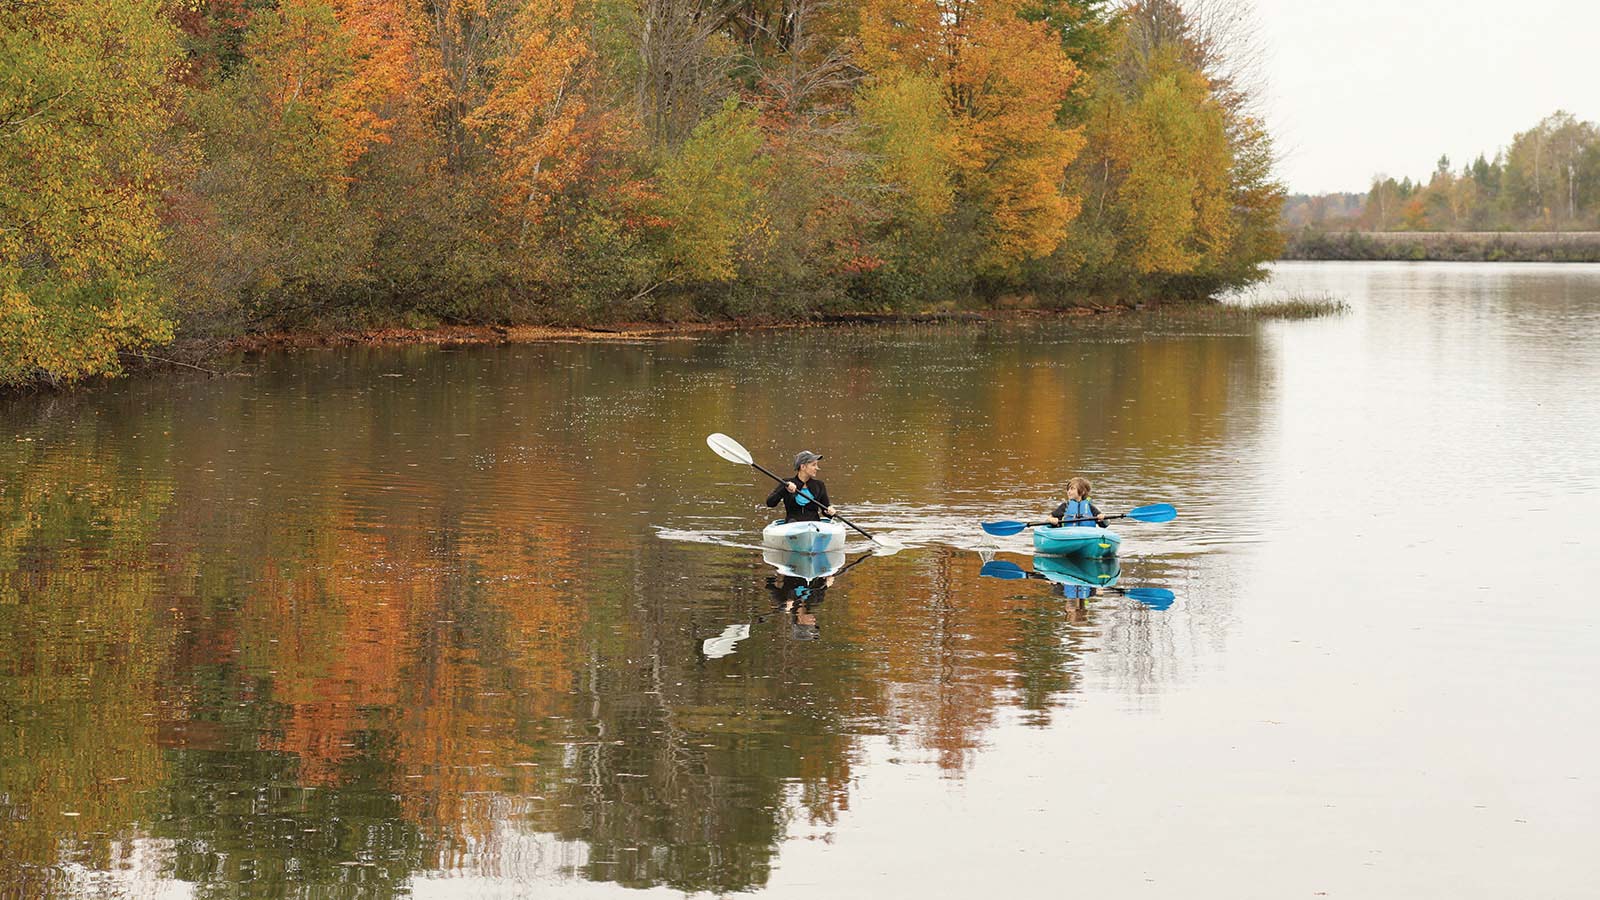 Two people kayaking the waters in autumn